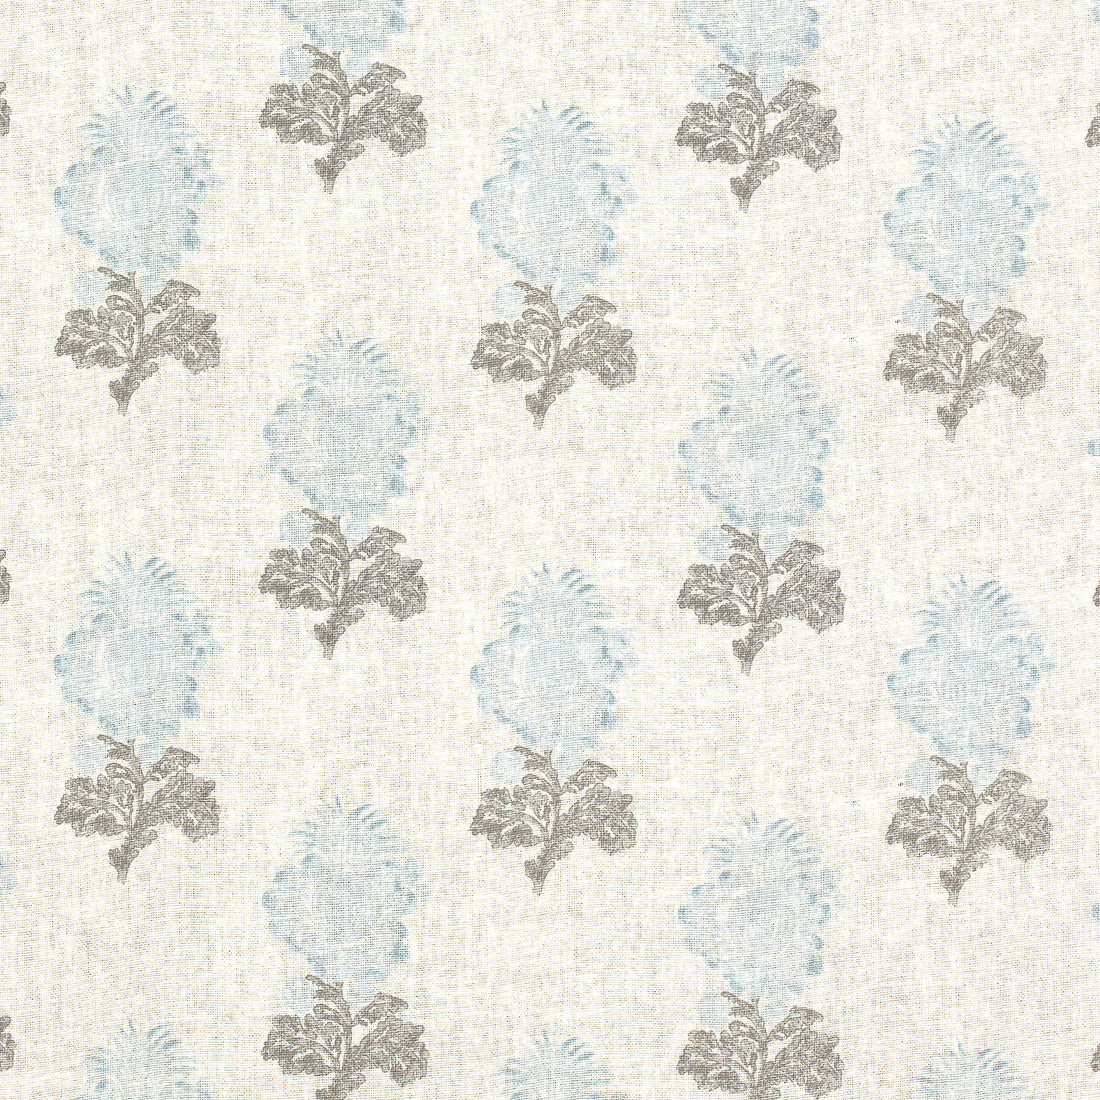 Aldith fabric in aqua color - pattern number F972607 - by Thibaut in the Chestnut Hill collection